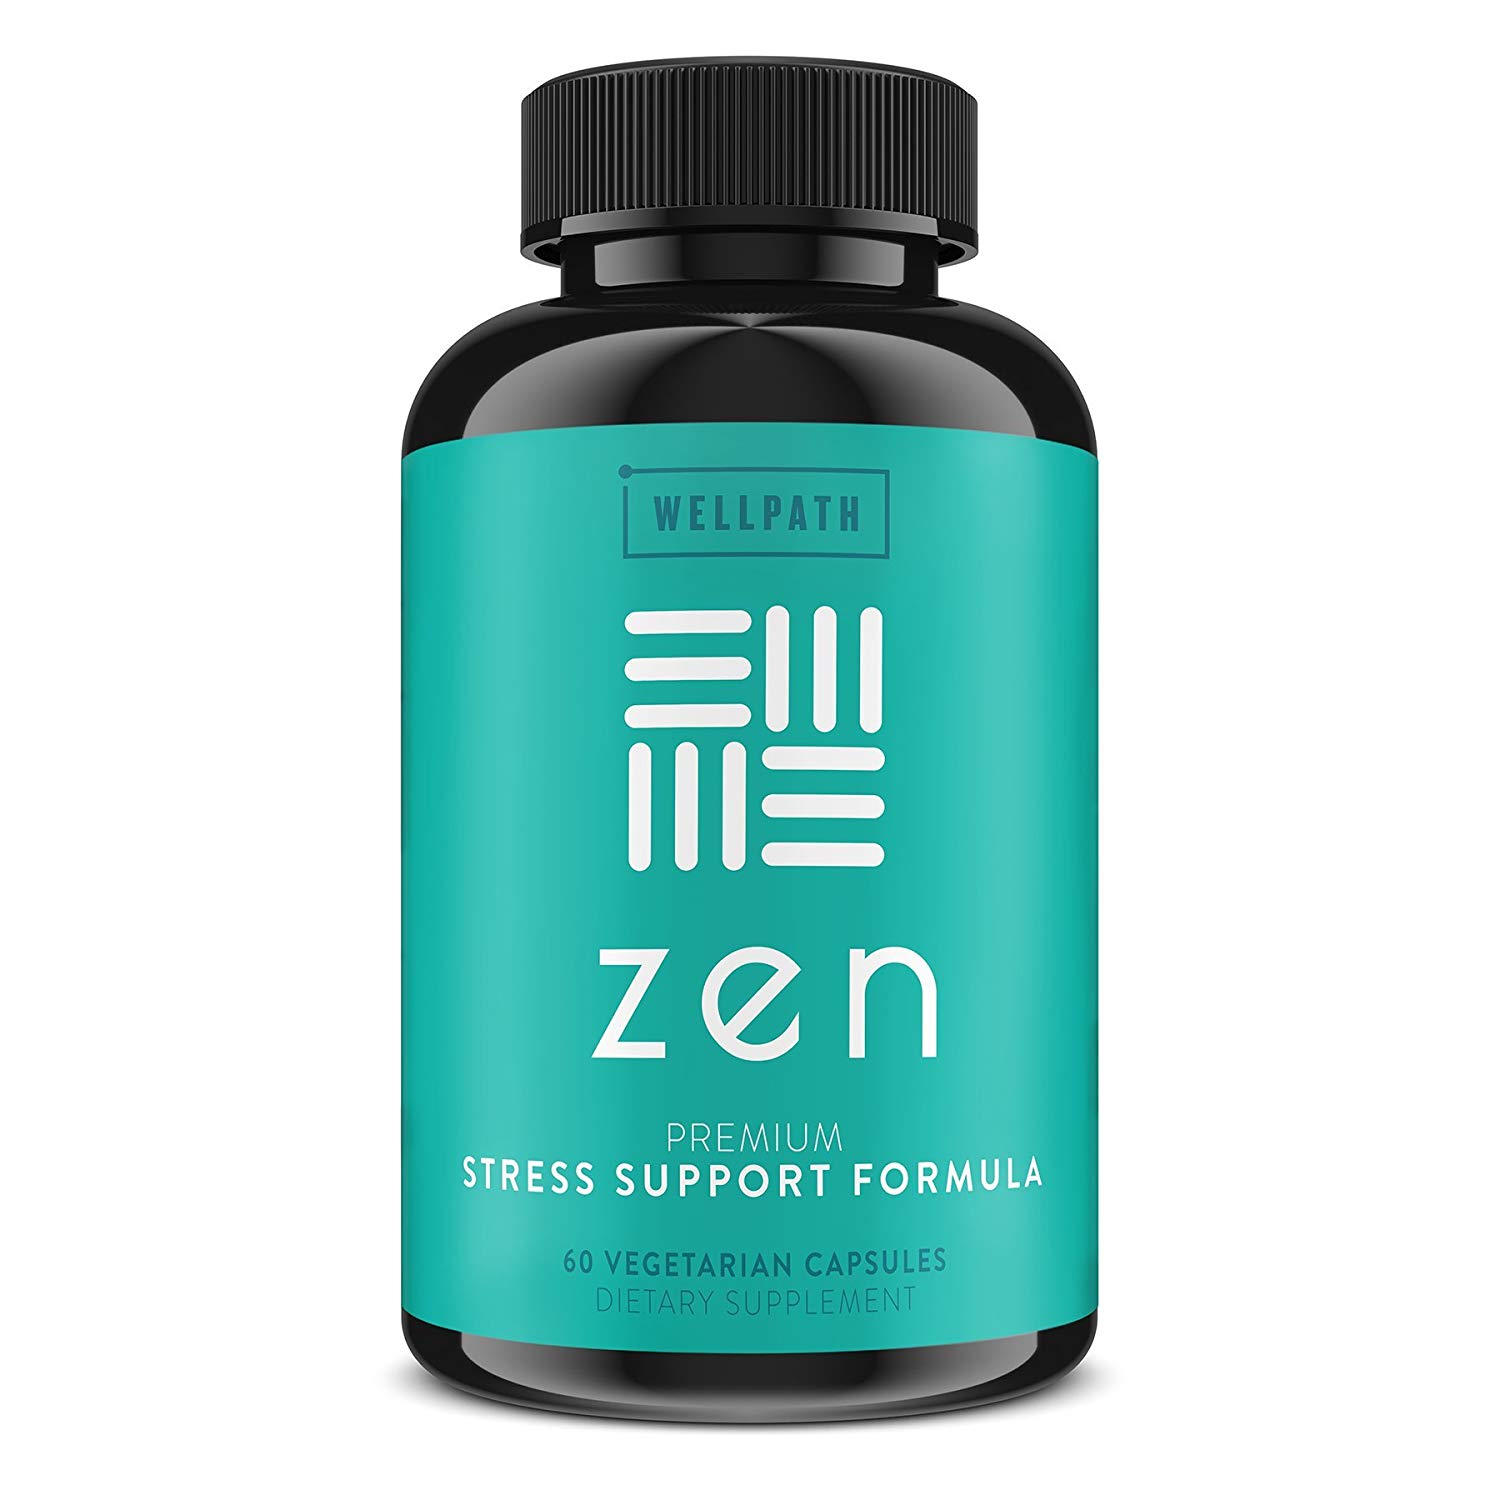 Review of Zen Premium Anxiety and Stress Relief Supplement - Natural Herbal Formula Developed to Promote Calm, Positive Mood - with Ashwagandha, L-Theanine, Rhodiola Rosea, Hawthorne - 60 Veg. Capsules